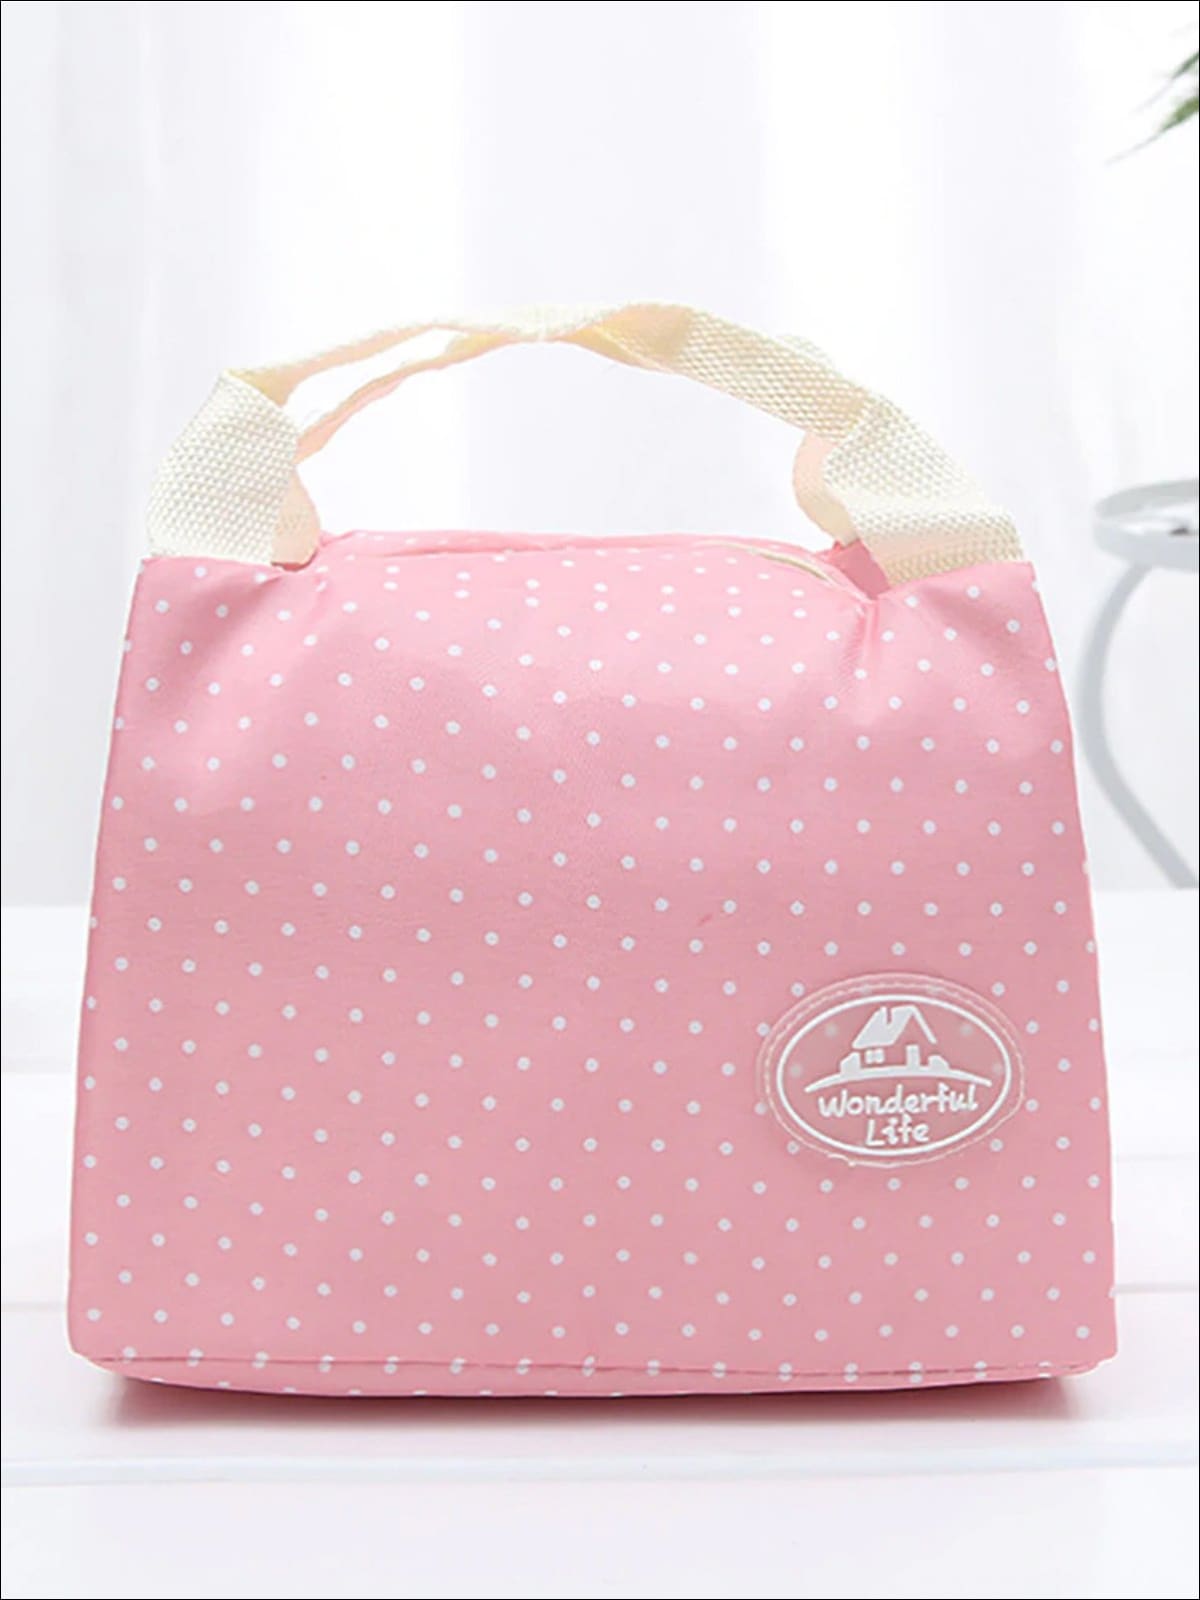 Girls Printed Insulated Canvas Carry Lunch Box - School Accessories - Mia Belle Girls